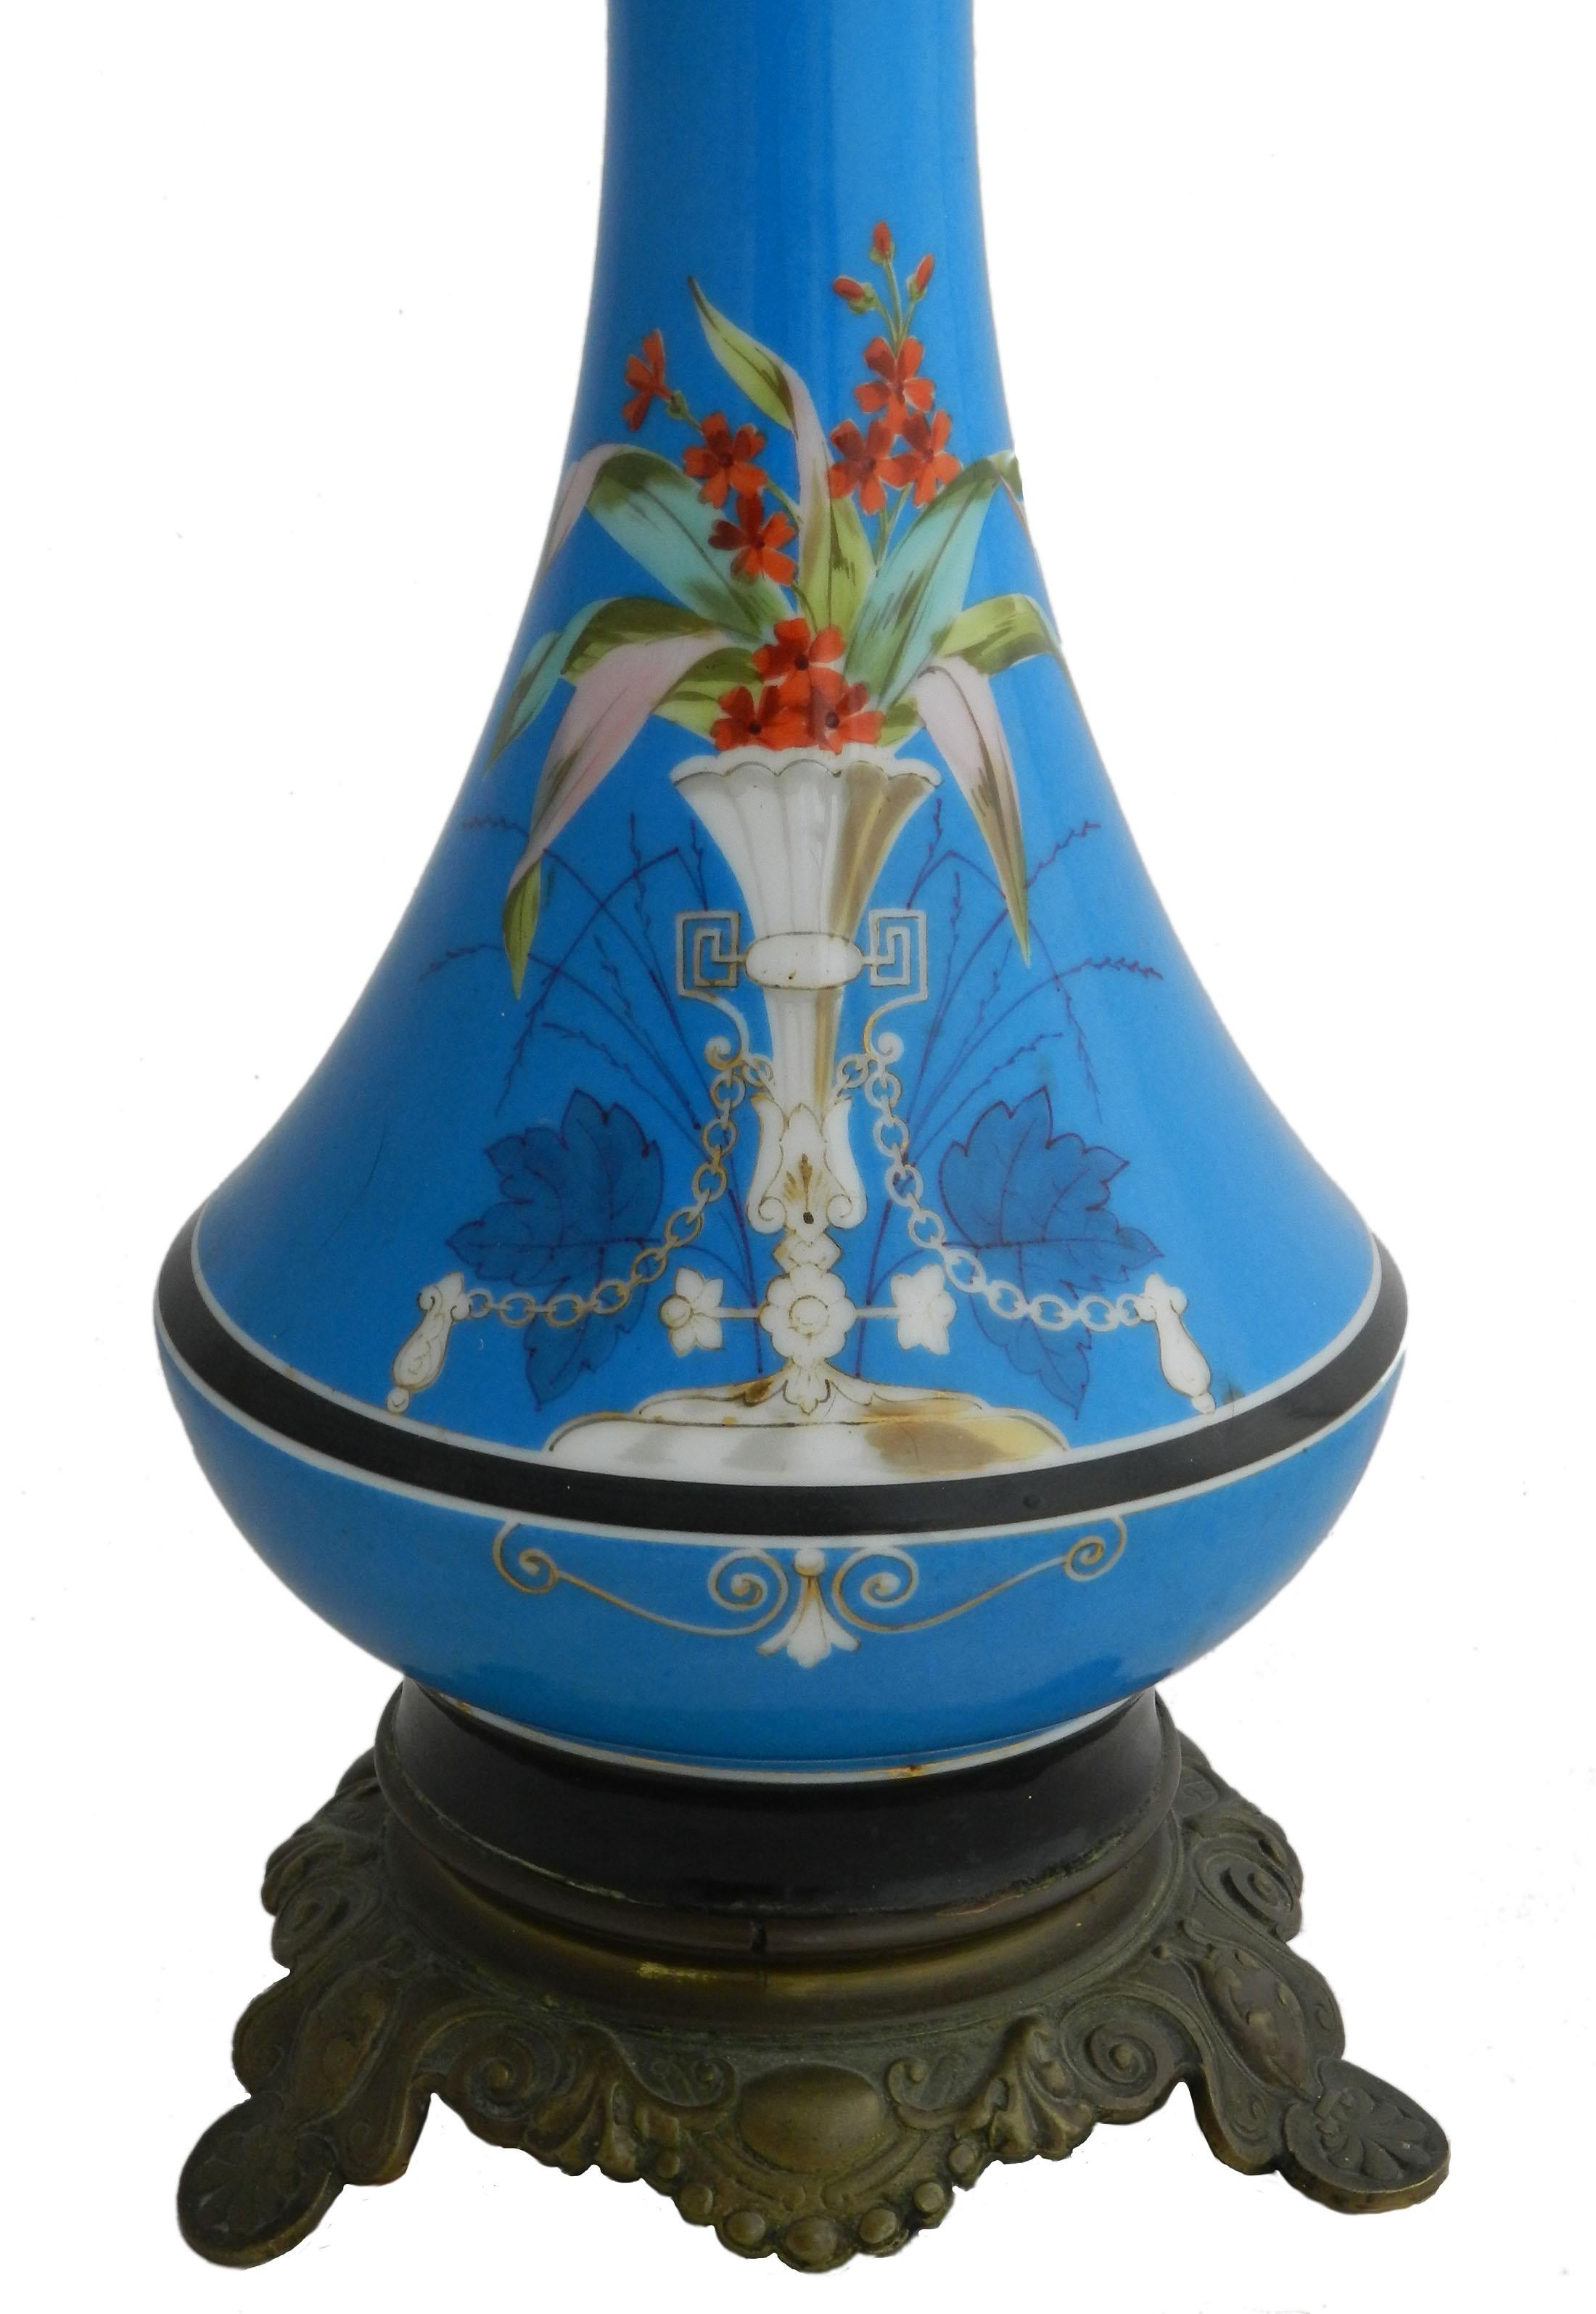 Antique Lamp Porcelain light French c1890
This has a base with flowers and an unusual stunning colour base
The lamp shade is not provided
This will be re-wired and tested to USA or UK and European standards ready to install.
Free Shipping to